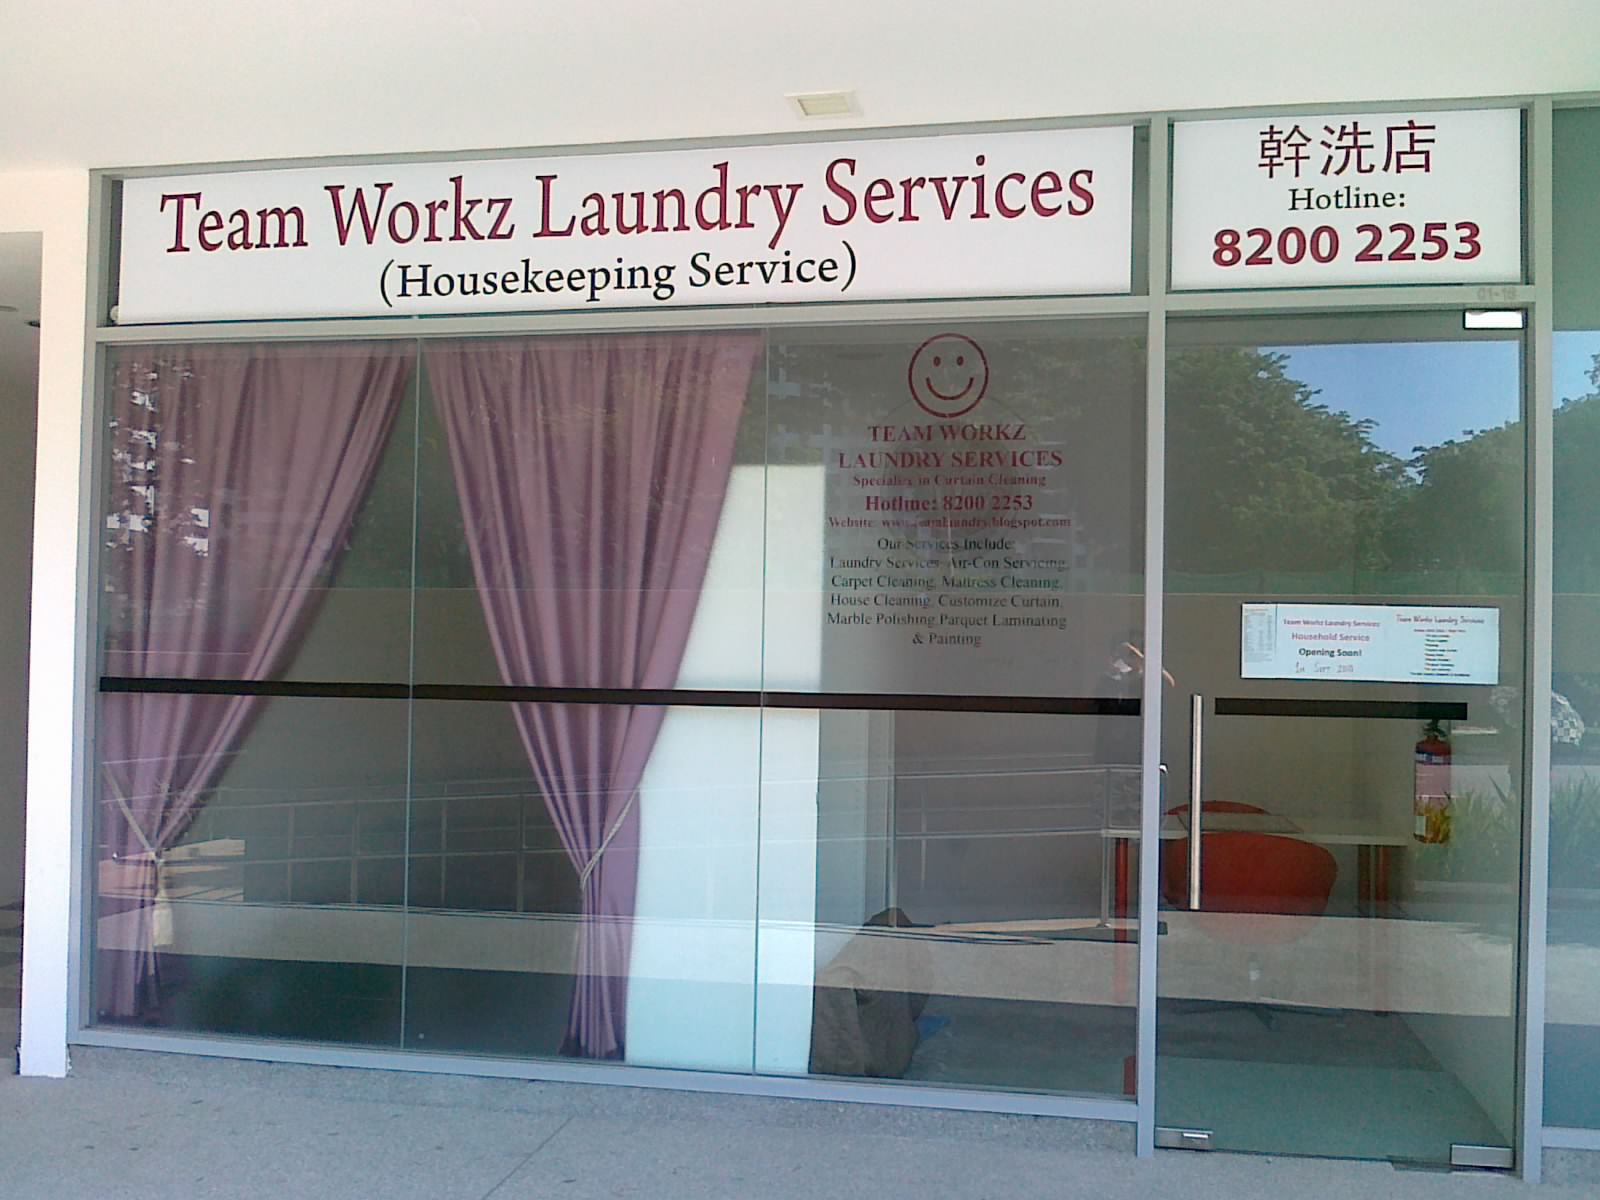 Team Workz Laundry Services: Team workz Laundry Services